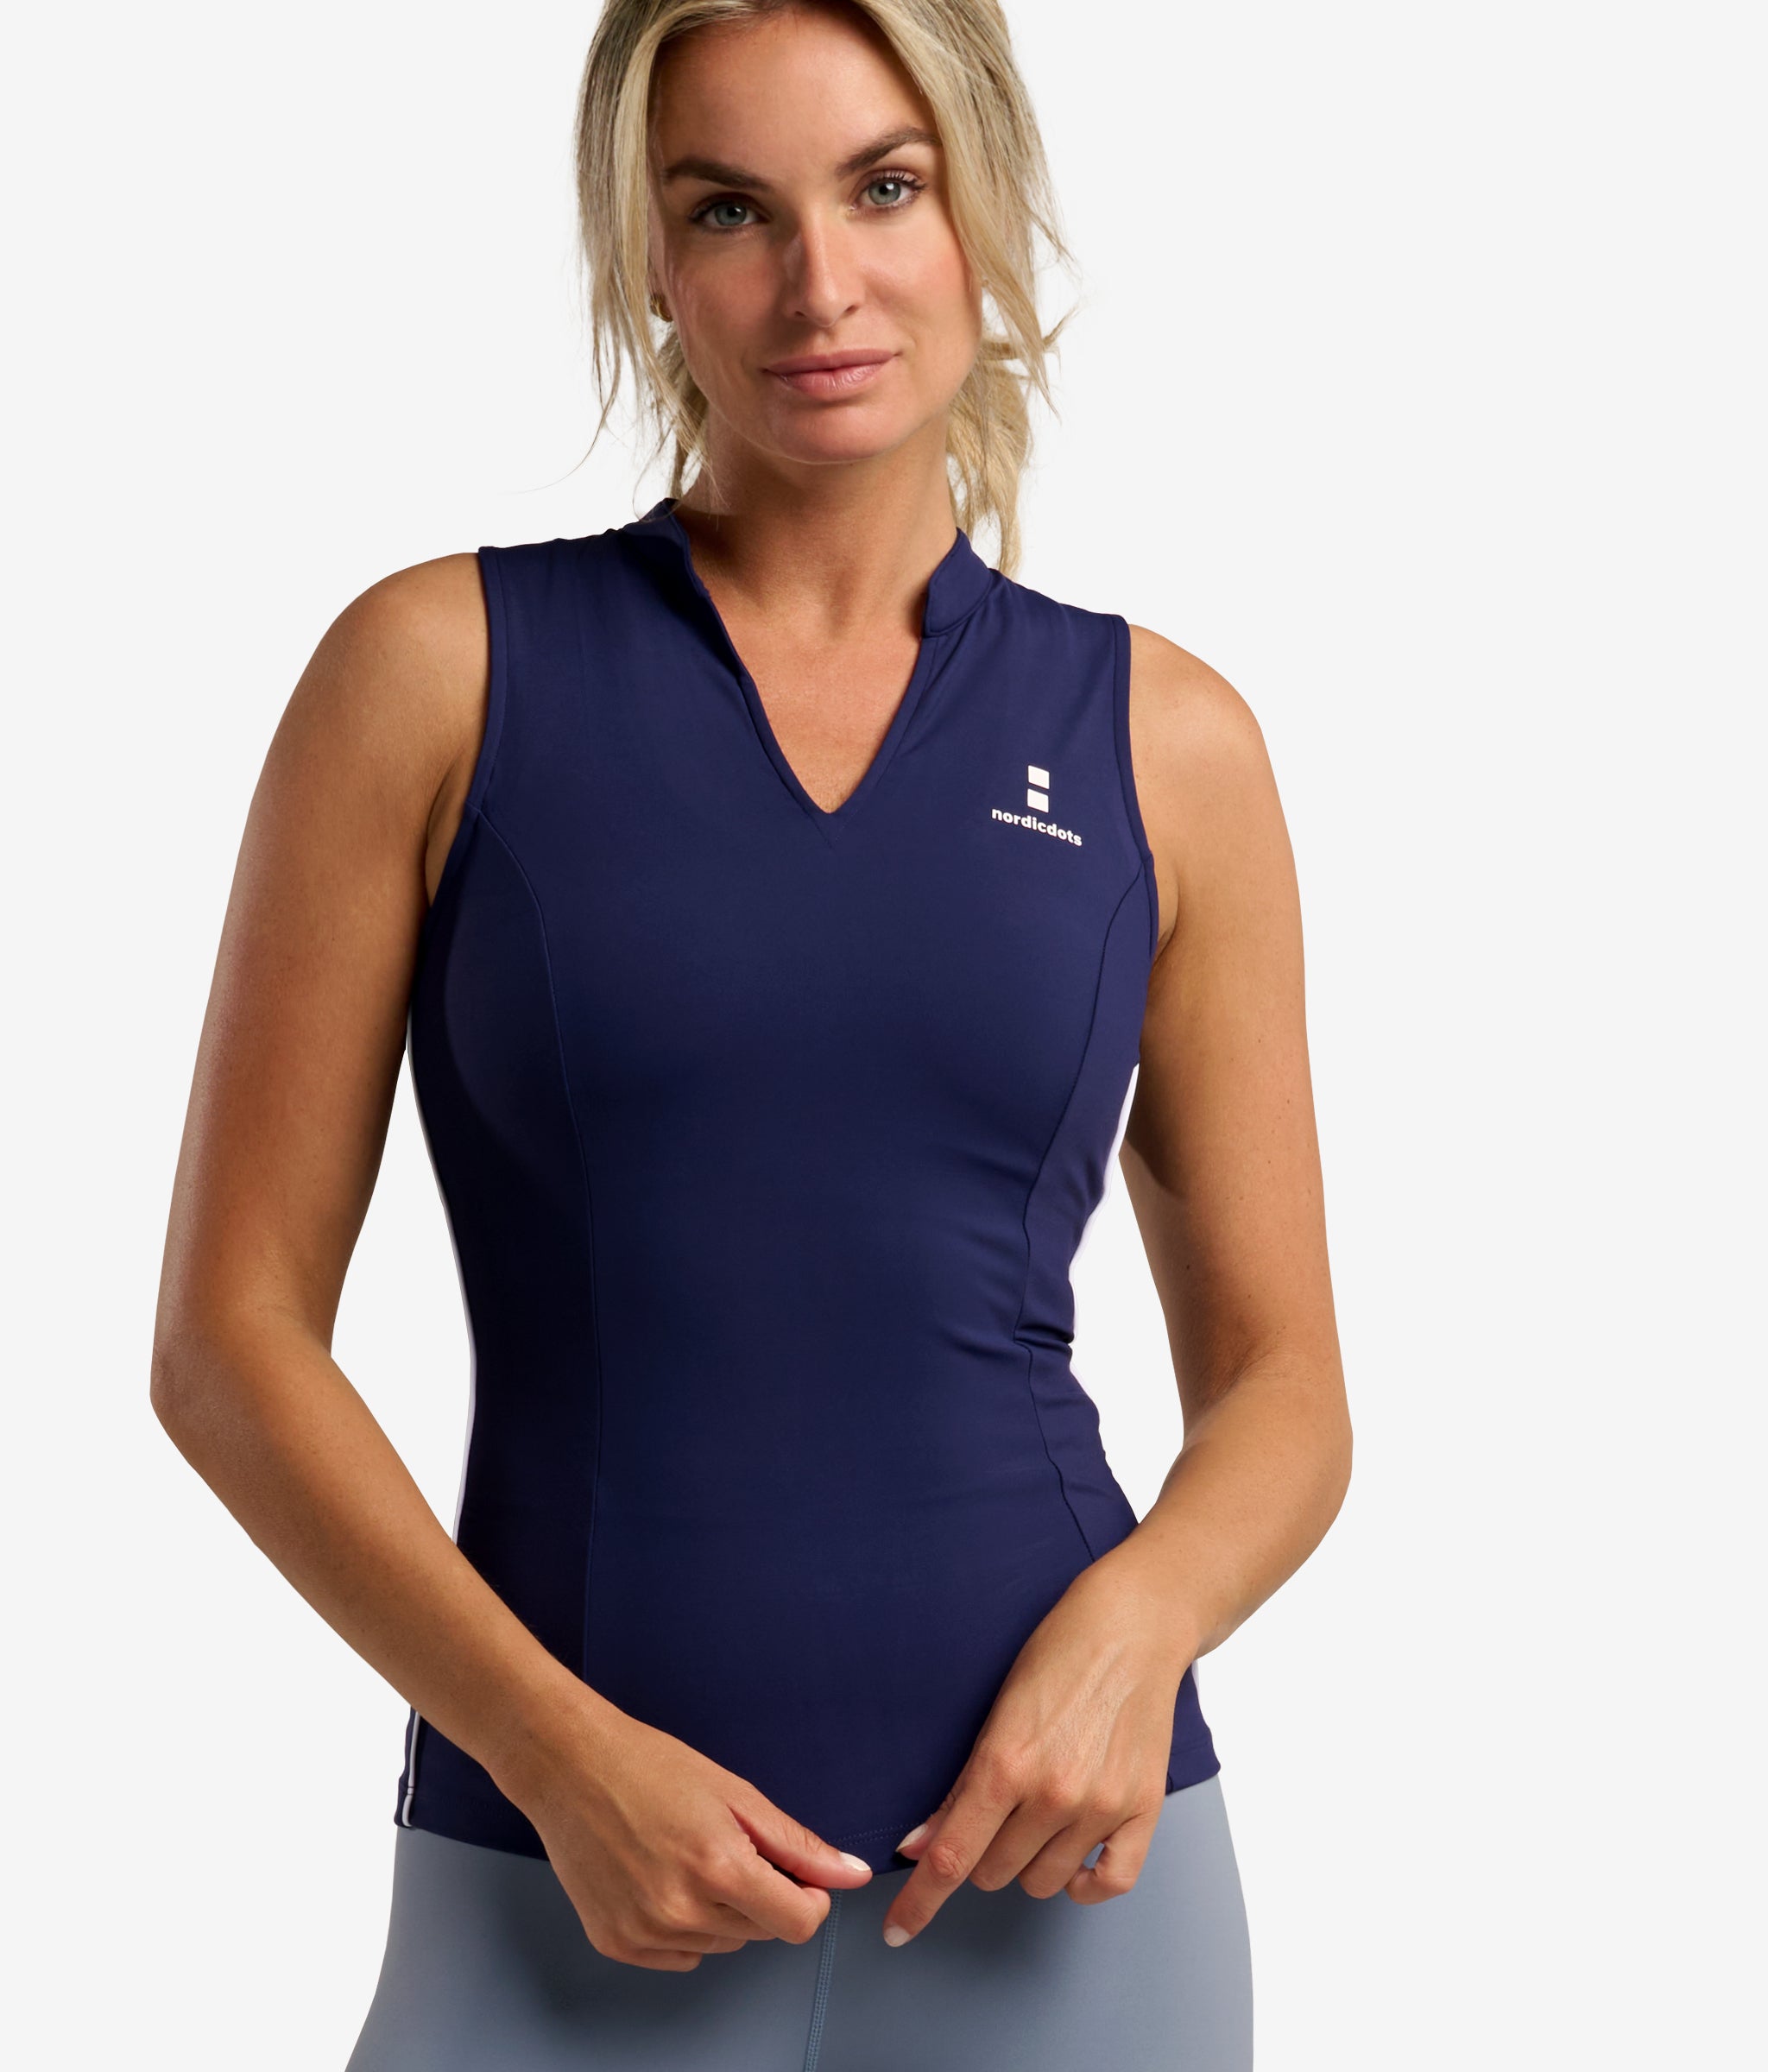 nordicdots women tennis padel golf beautiful sustainable outfit in navy blue nordicdots.com